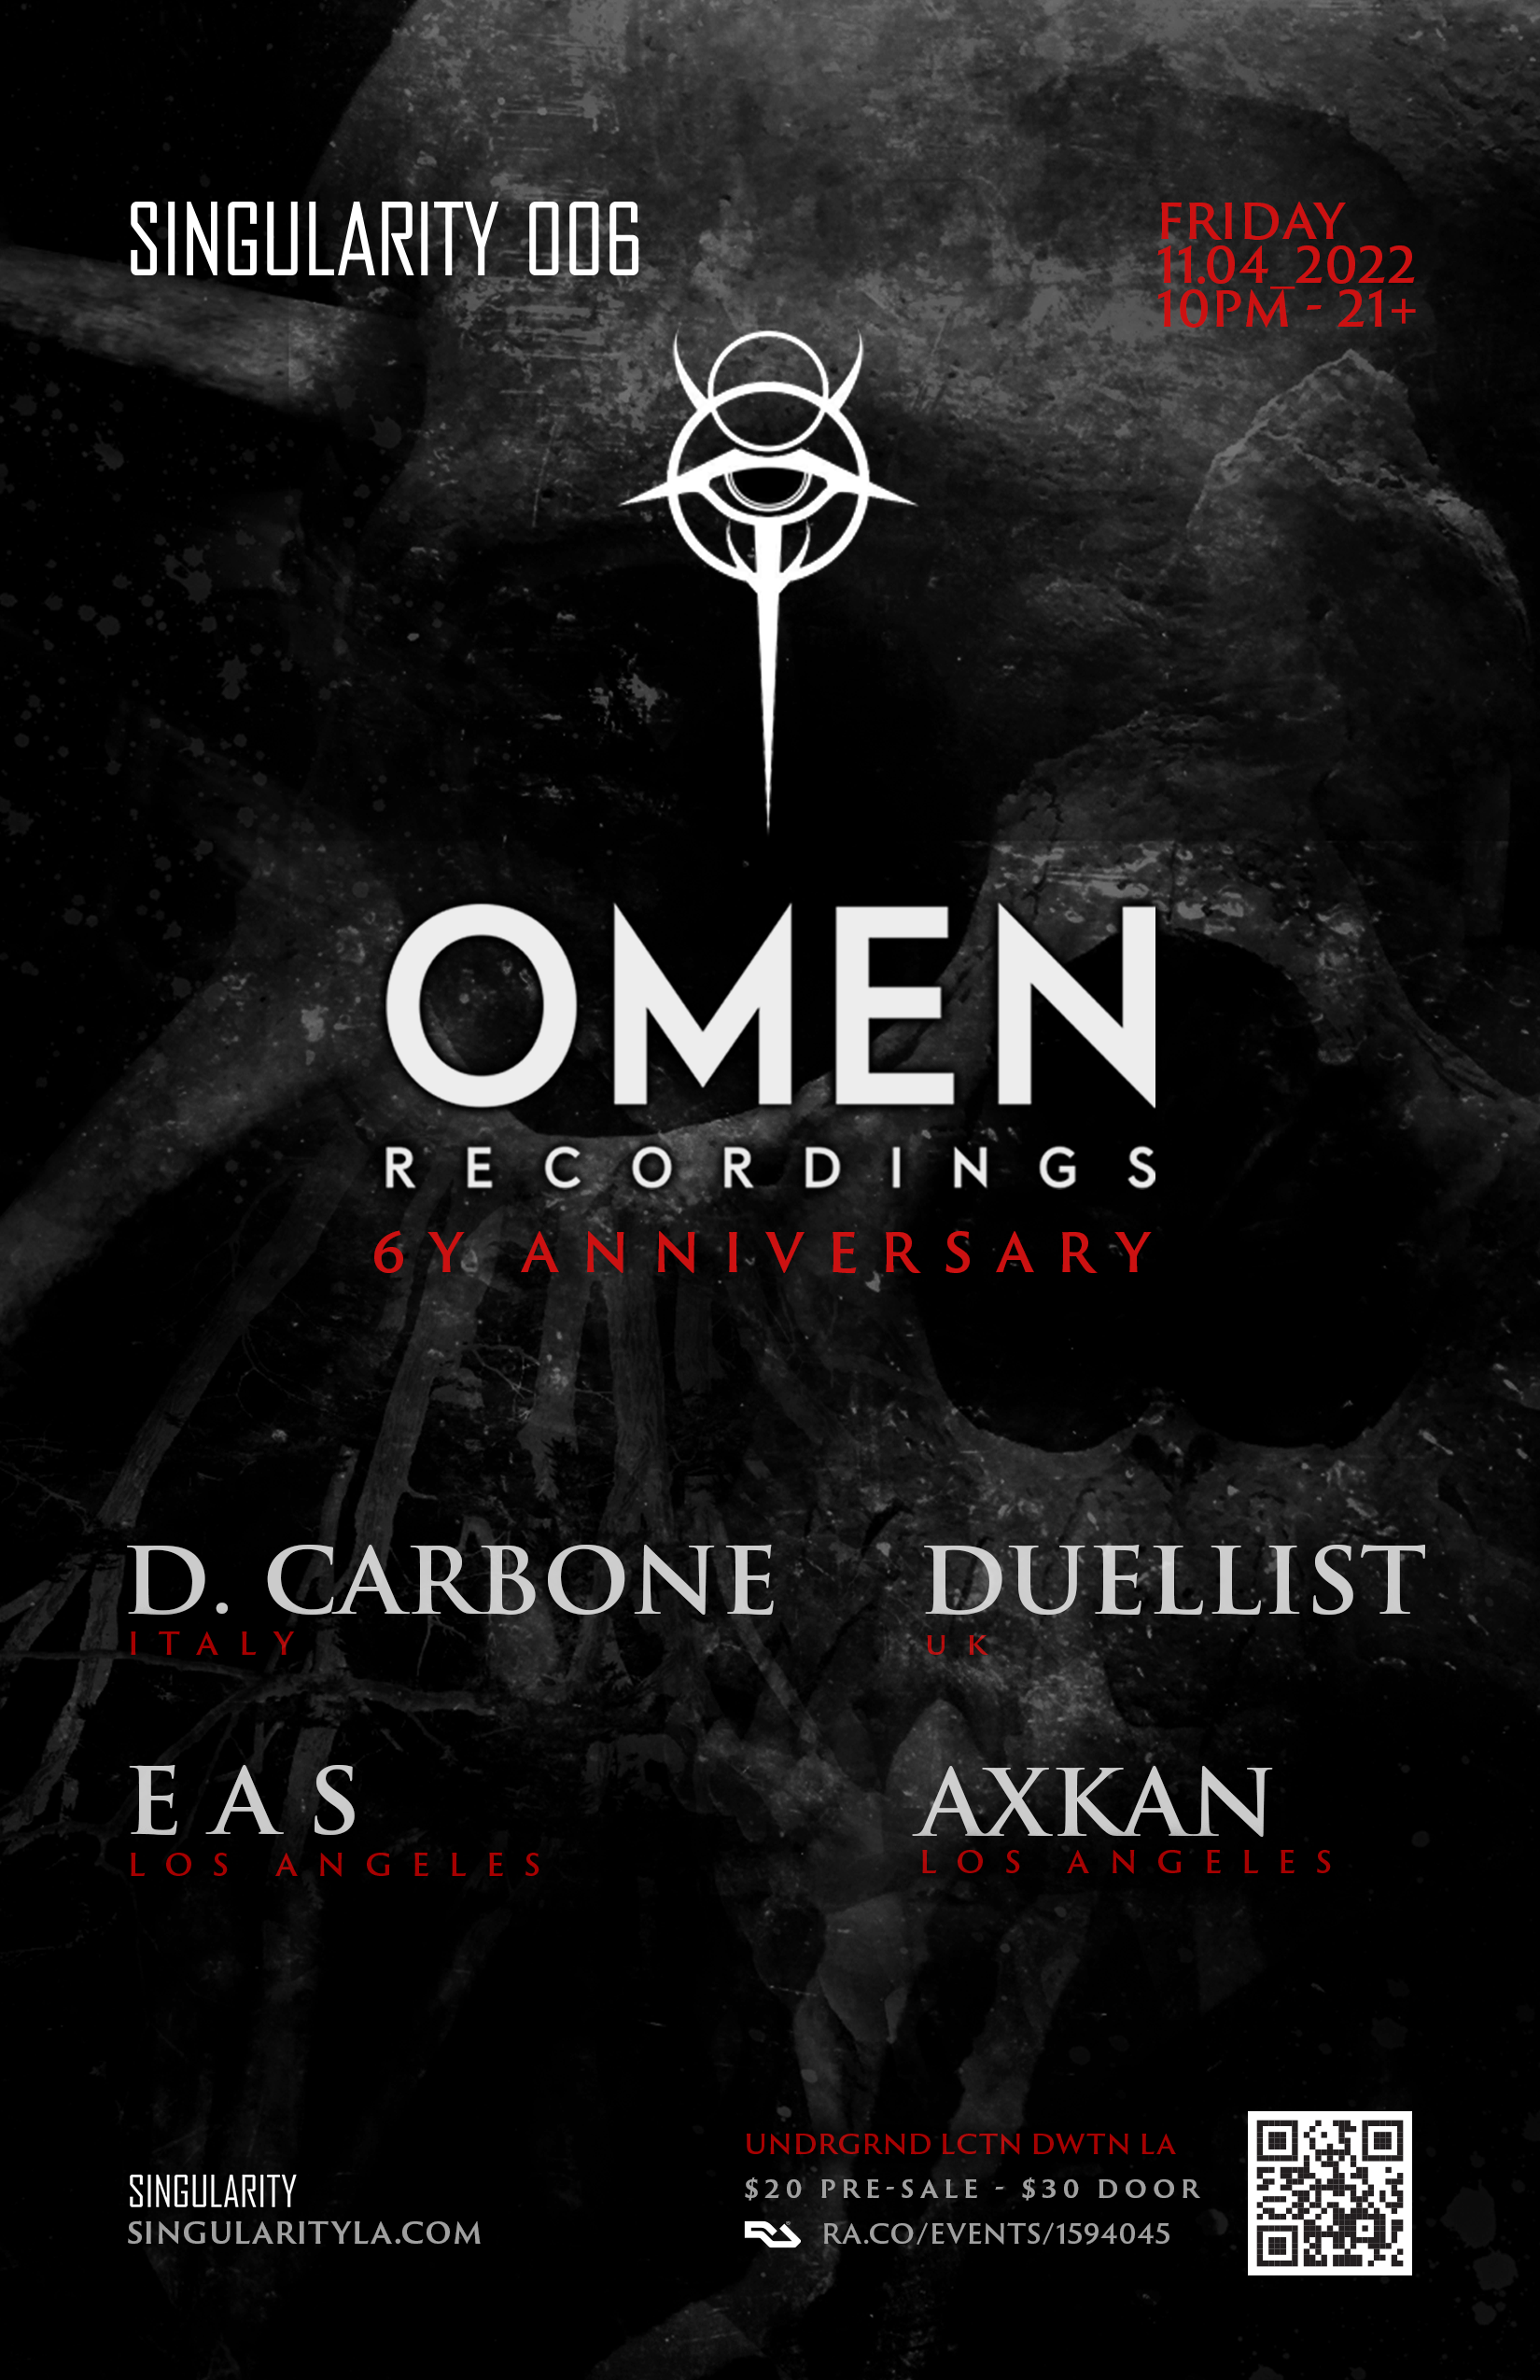 OMEN 6 Years - Singularity 006 with D. Carbone, Duellist, EAS, Axkan - Página frontal